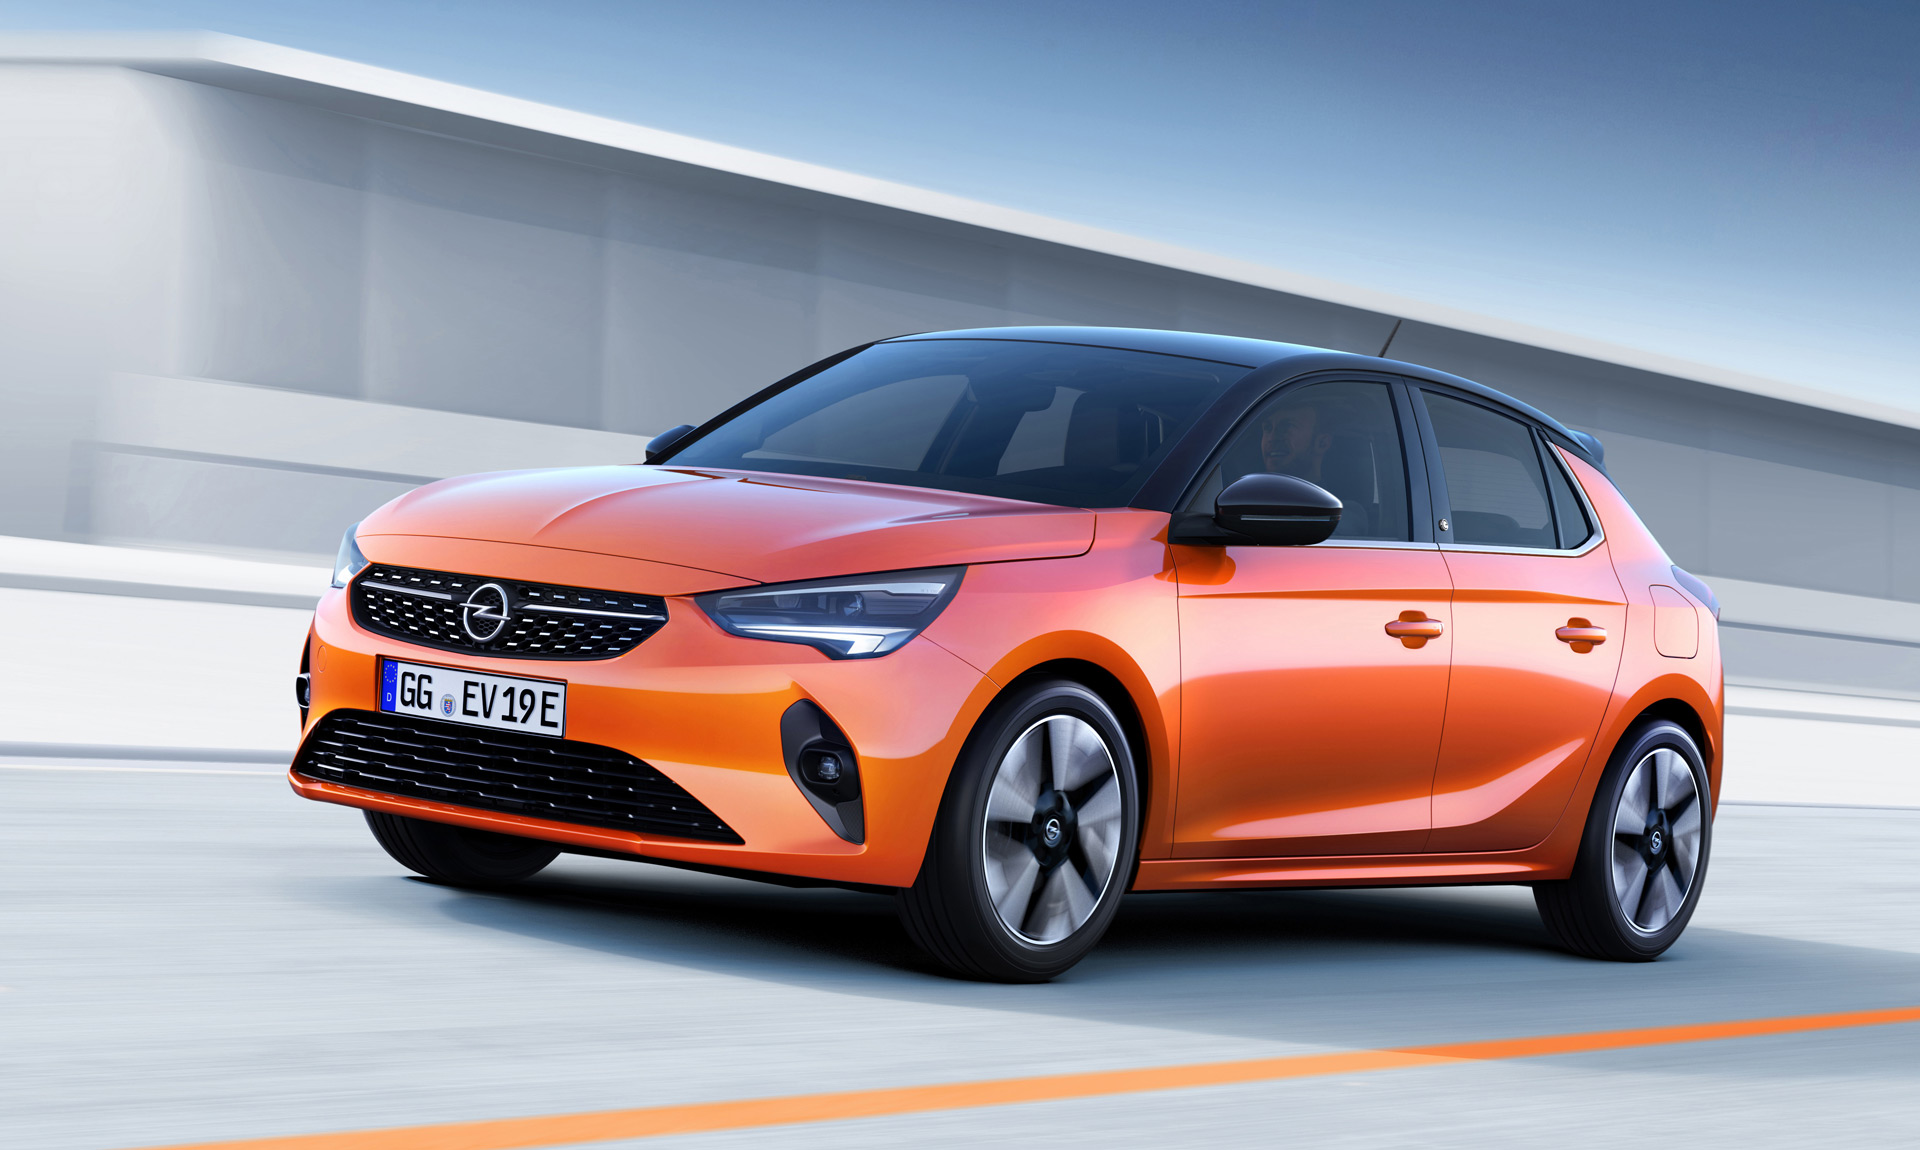 Opel's car GM is the 2020 Corsa-e electric